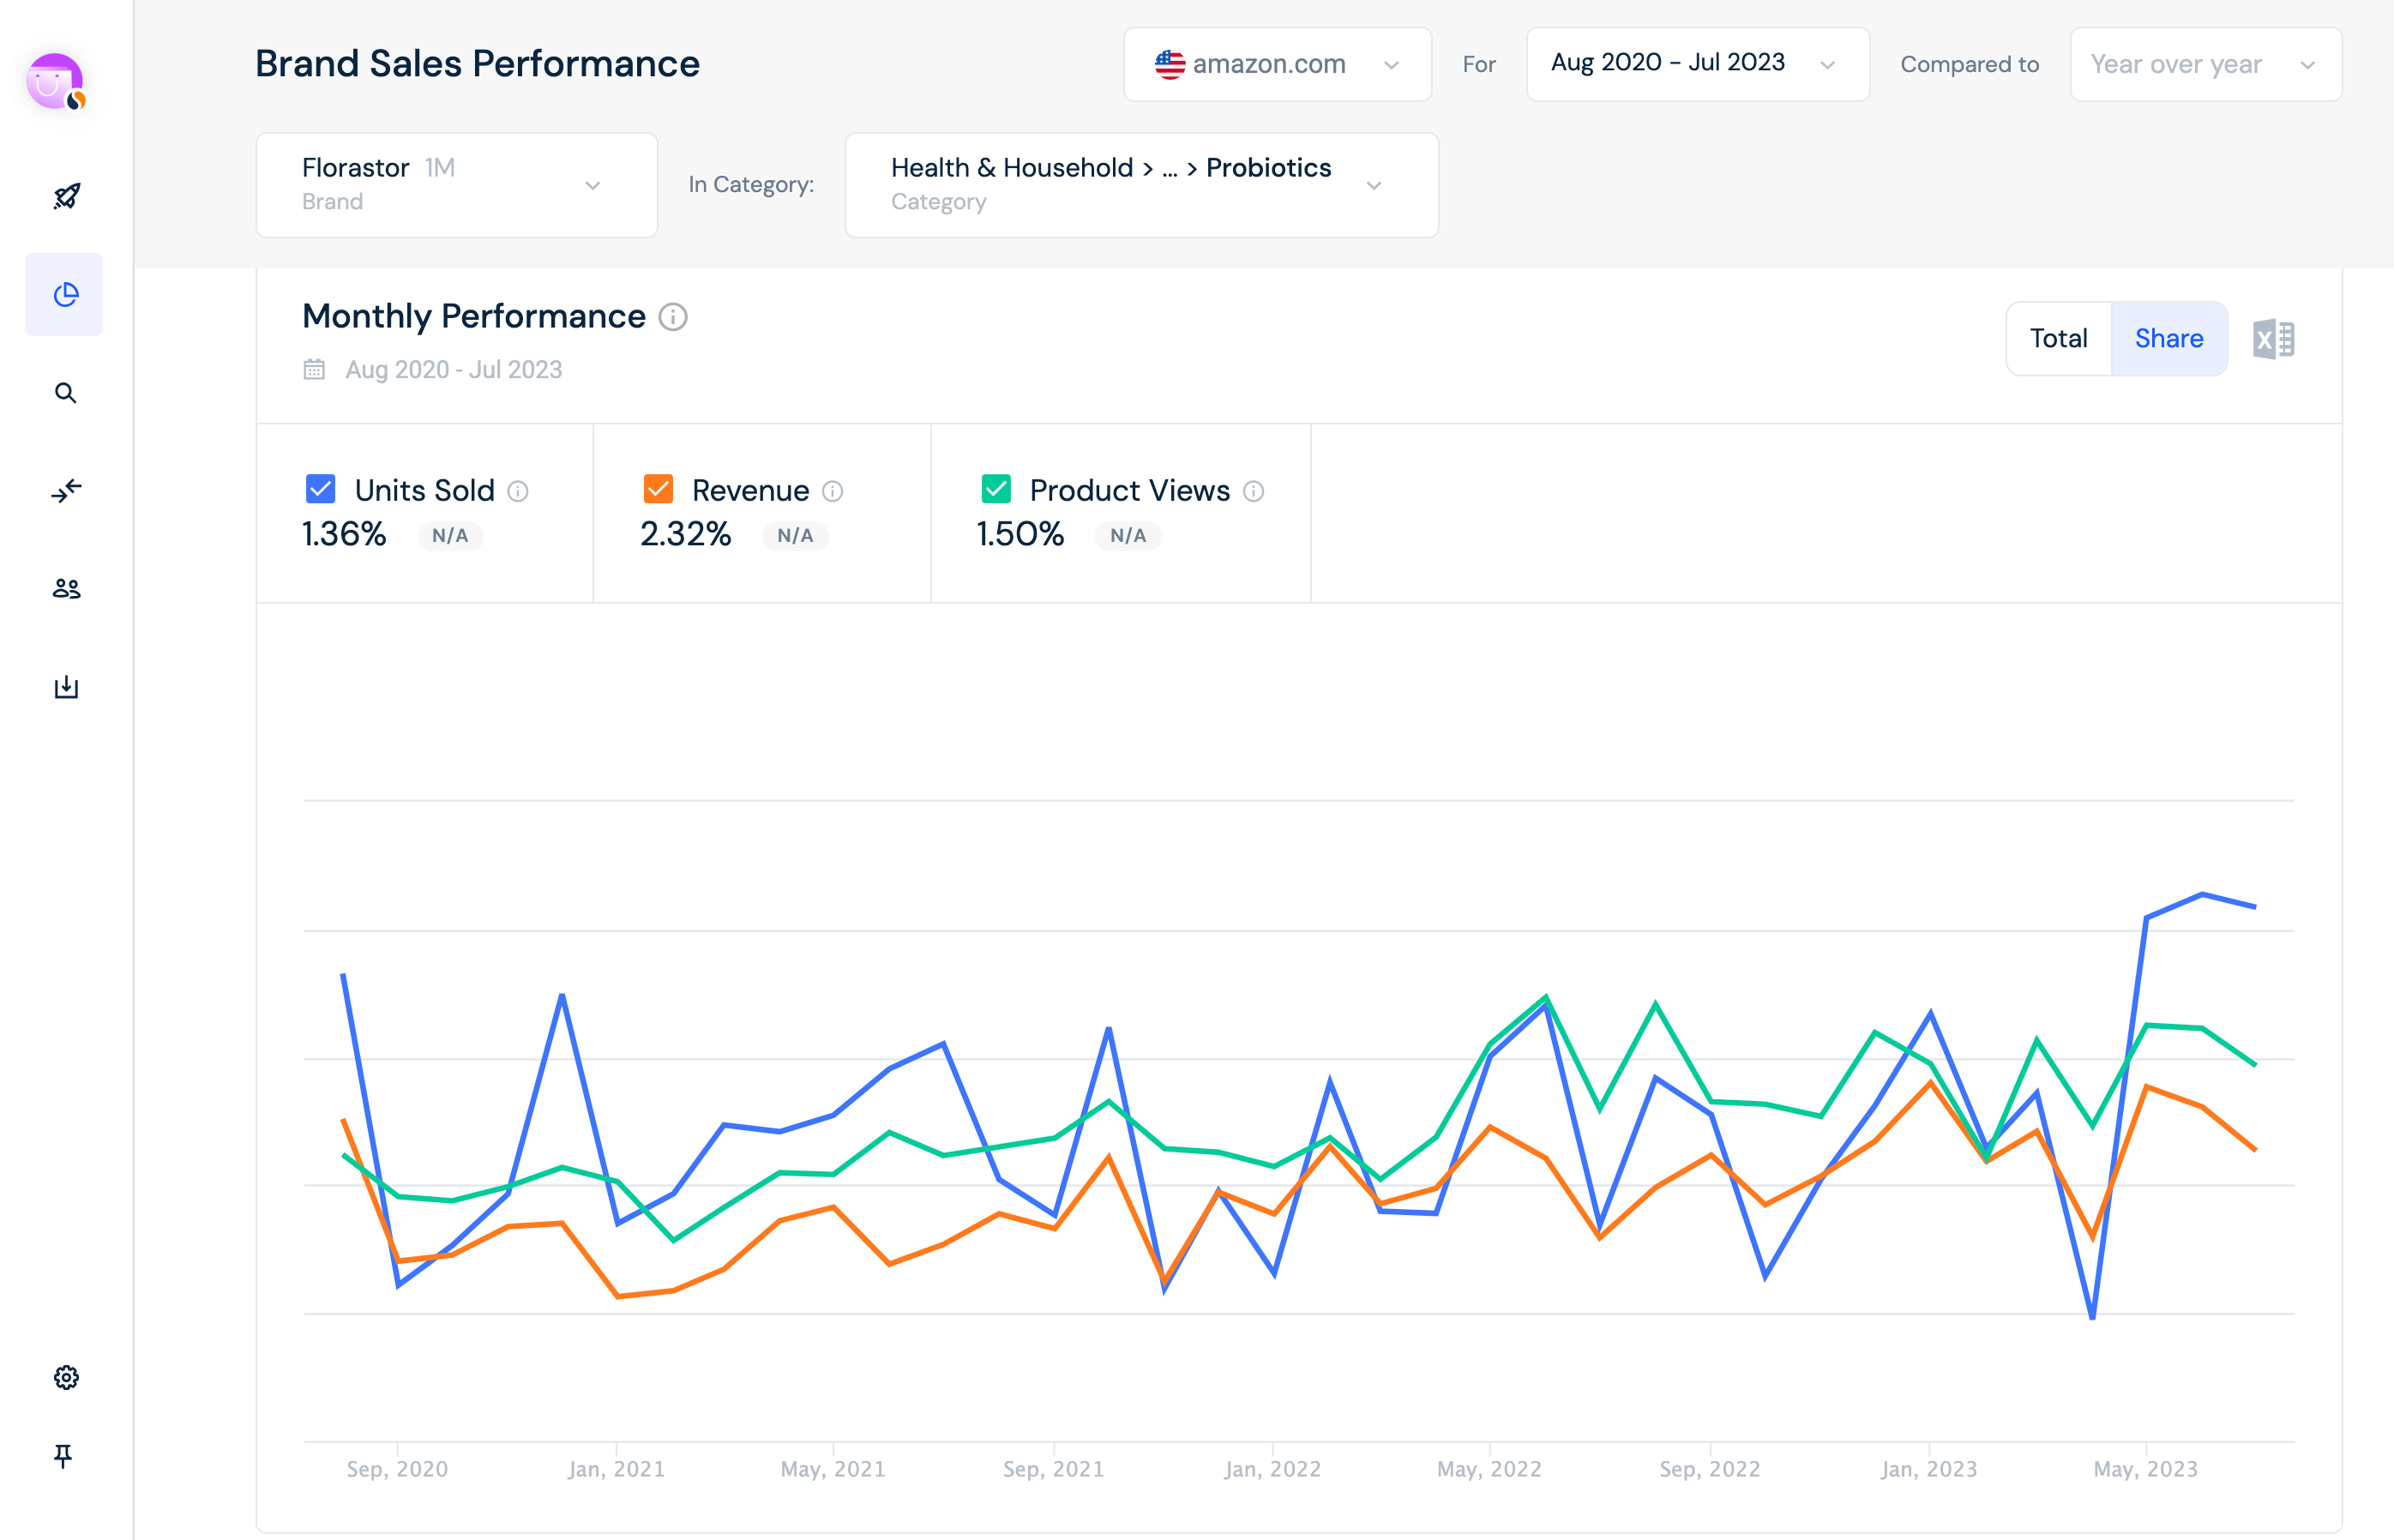 With Similarweb Shopper Solution the team could see their market share for Units Sold, Revenue, and Product Views over time in probiotics category.